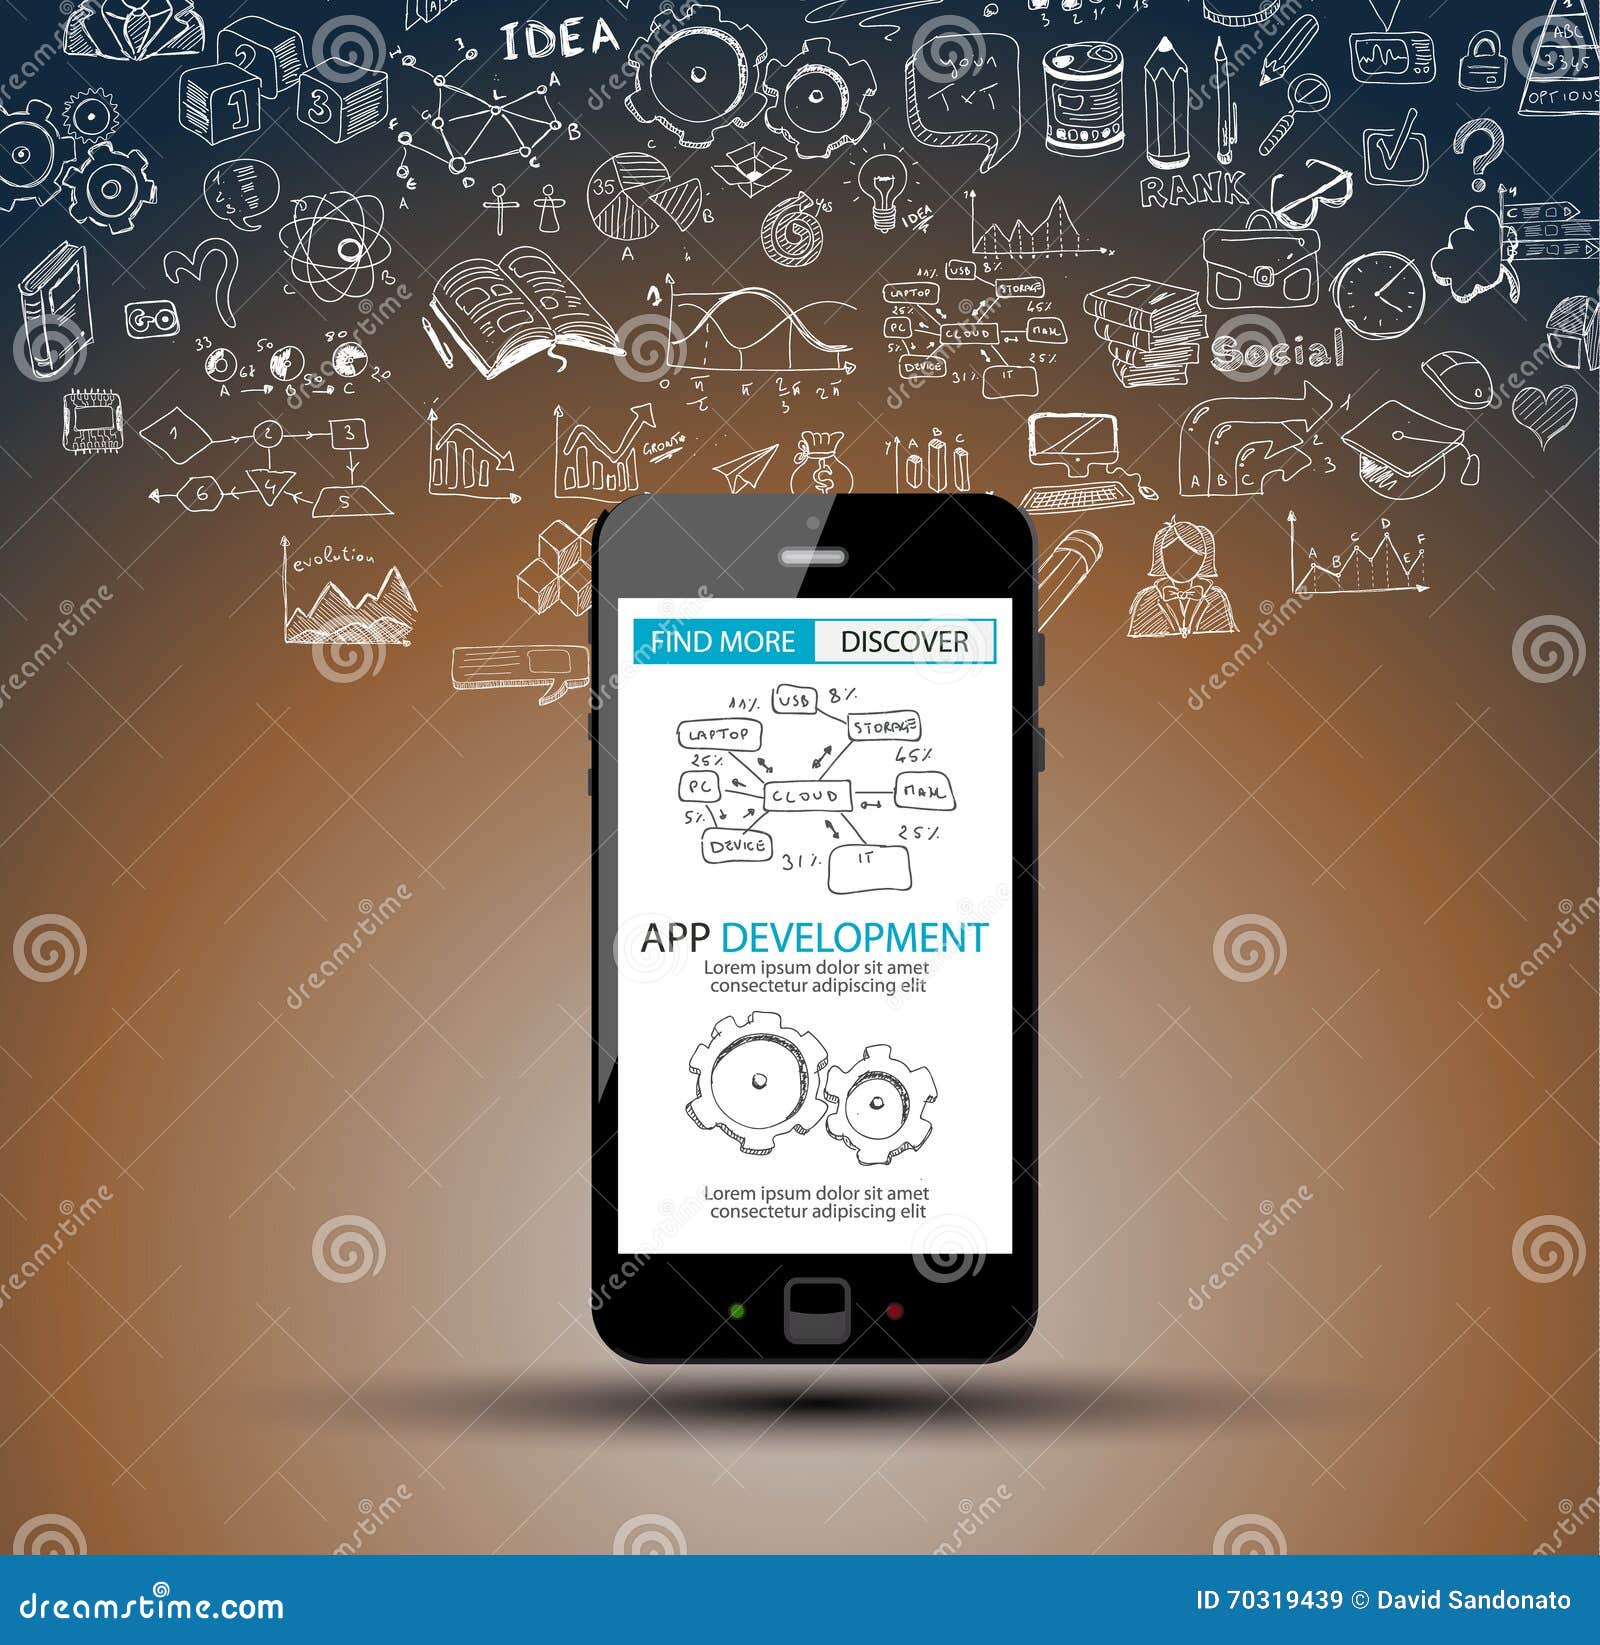  App Development Infpgraphic Concept Background With Doodle 